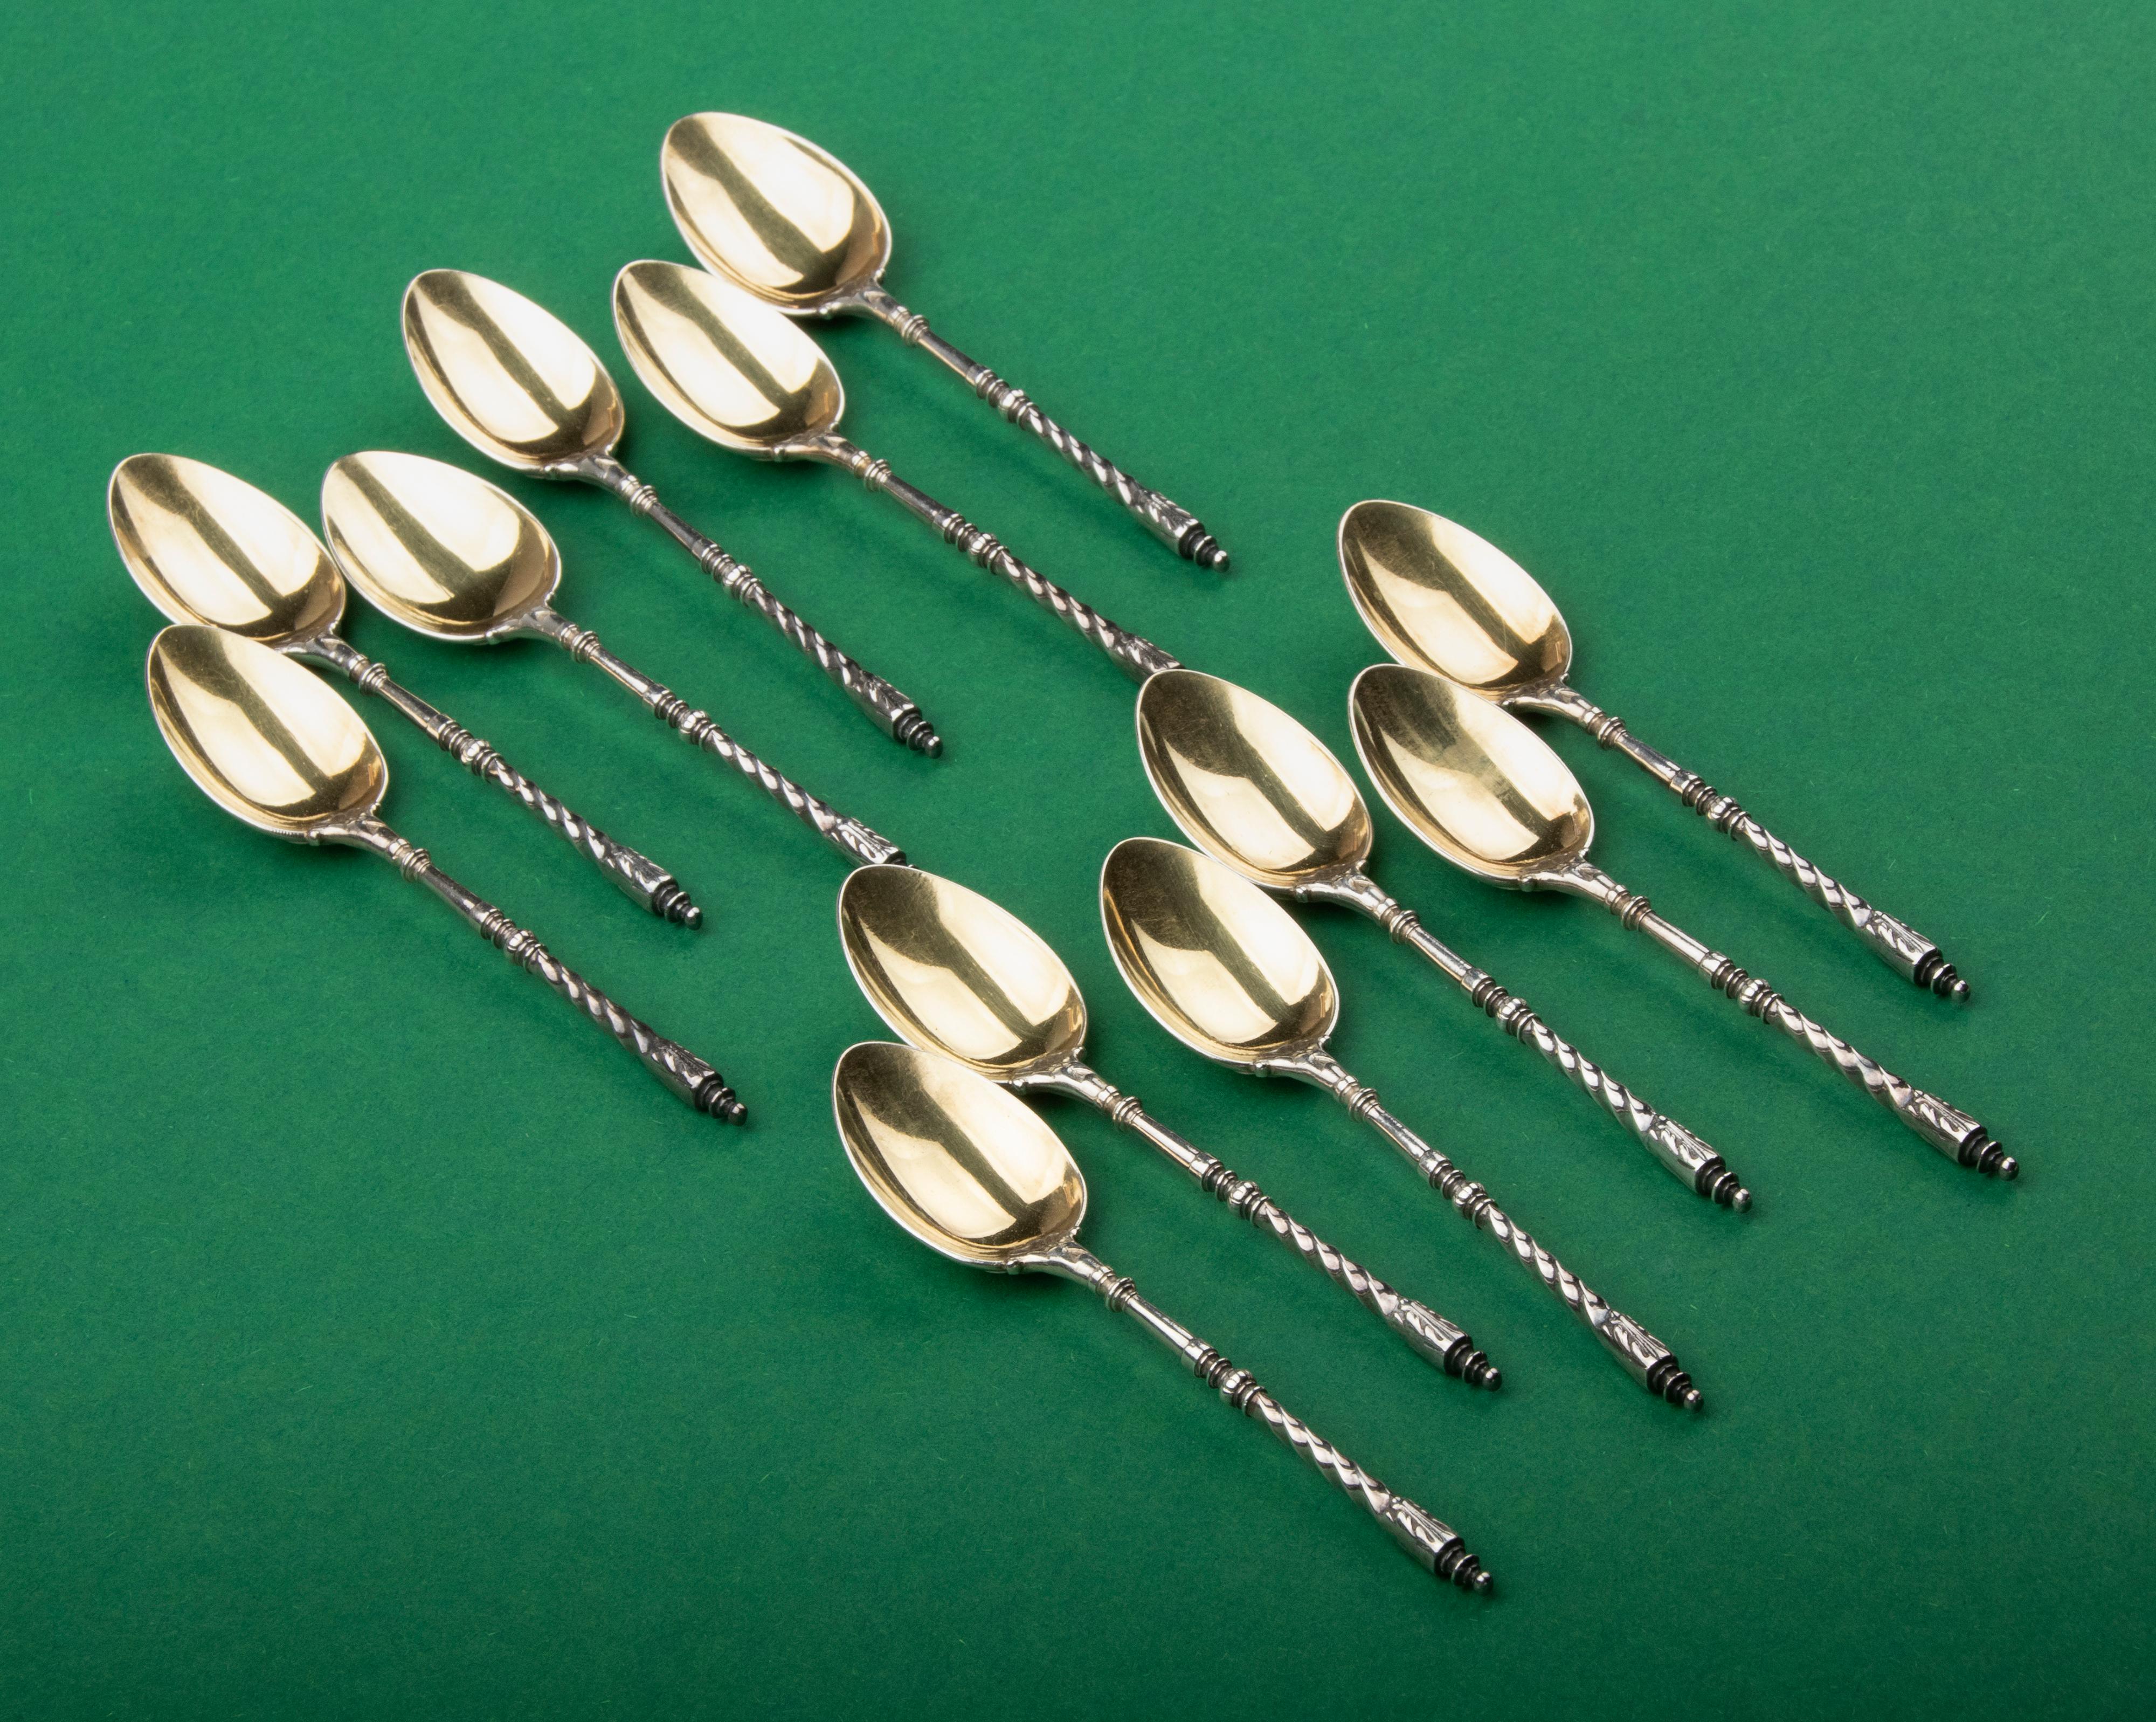 Set of 12 Antique Silver-Plated and Gilded Tea spoons made by Christofle For Sale 9